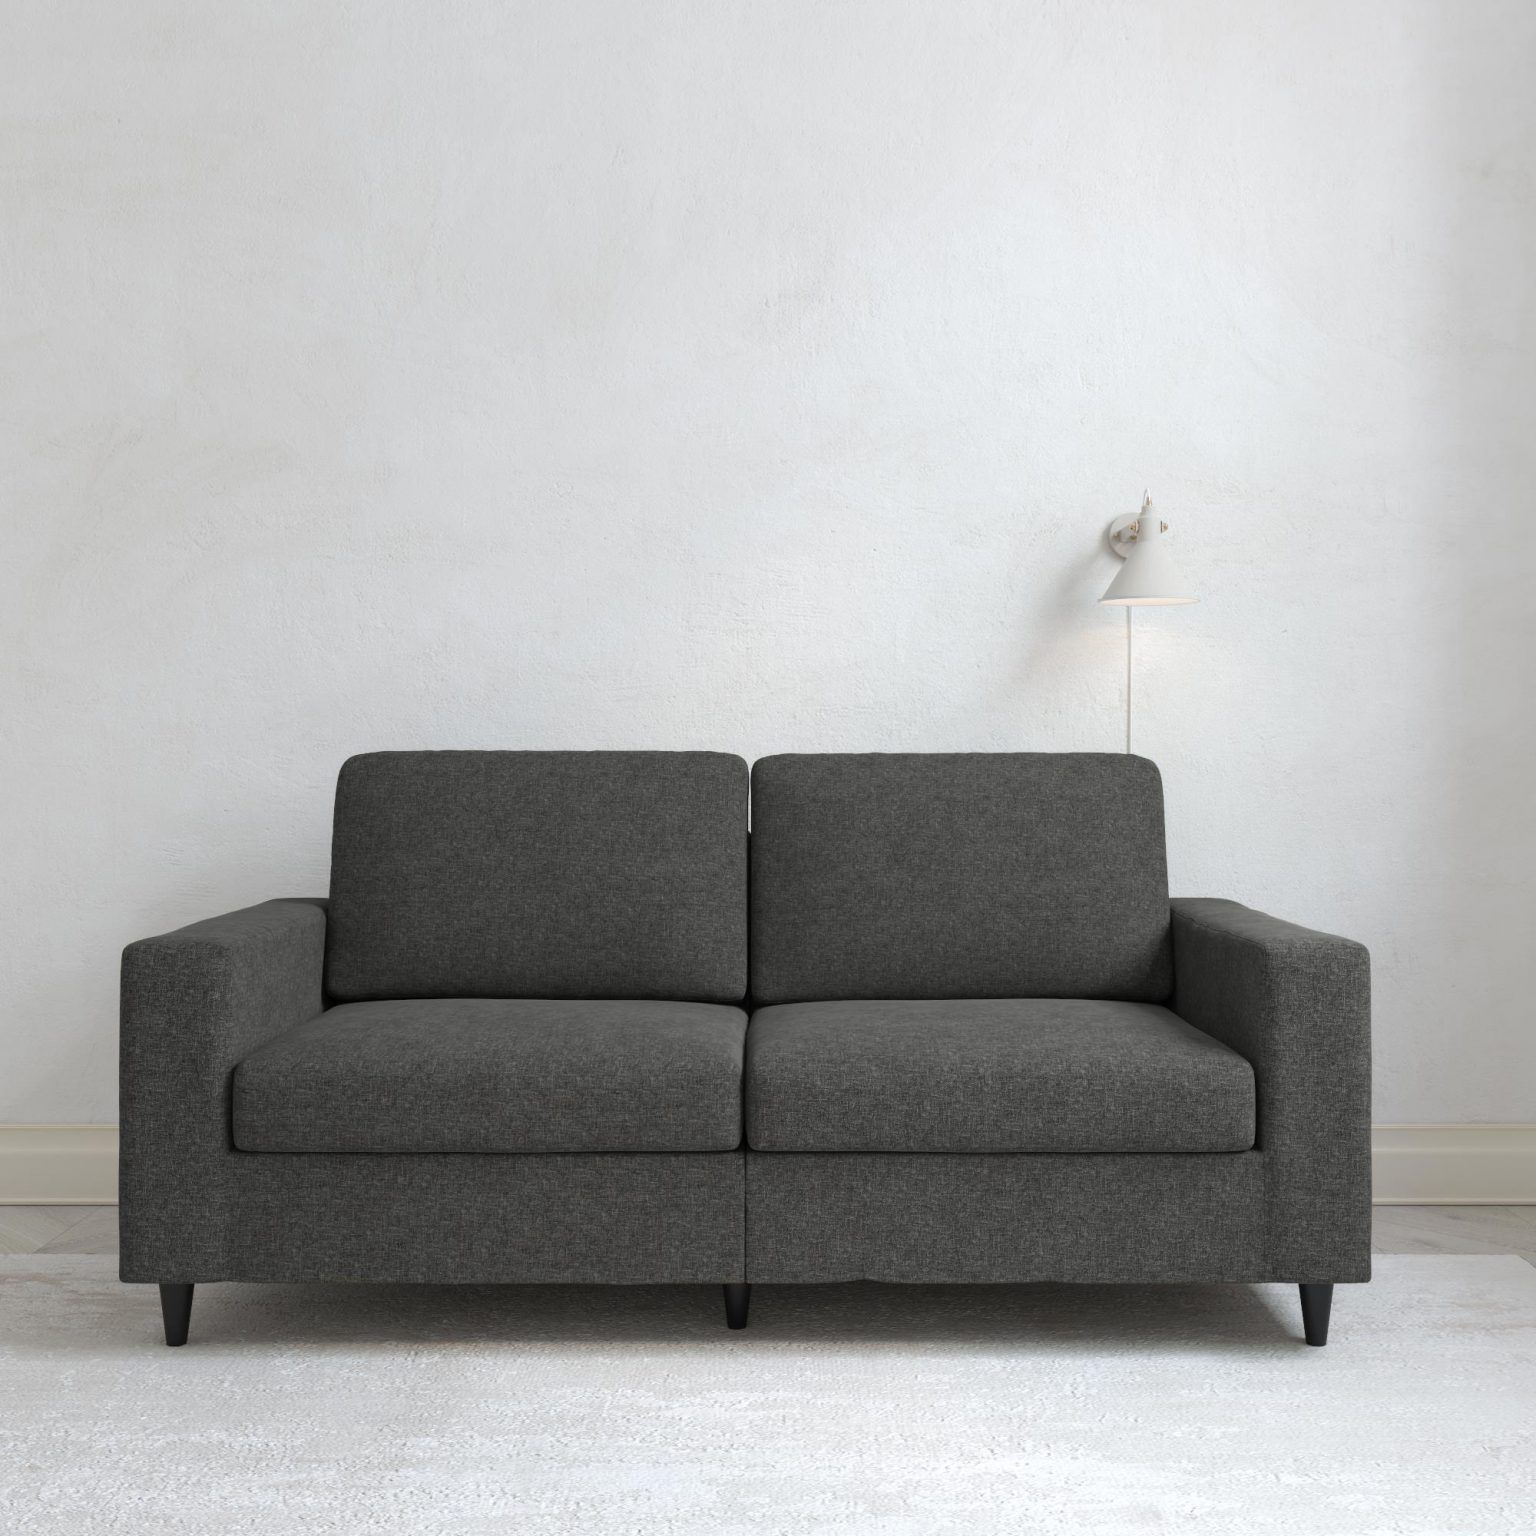 Dhp Cooper Sofa, Gray Linen – Awzhome – The Best At Affordable Prices Regarding Gray Linen Sofas (View 20 of 20)